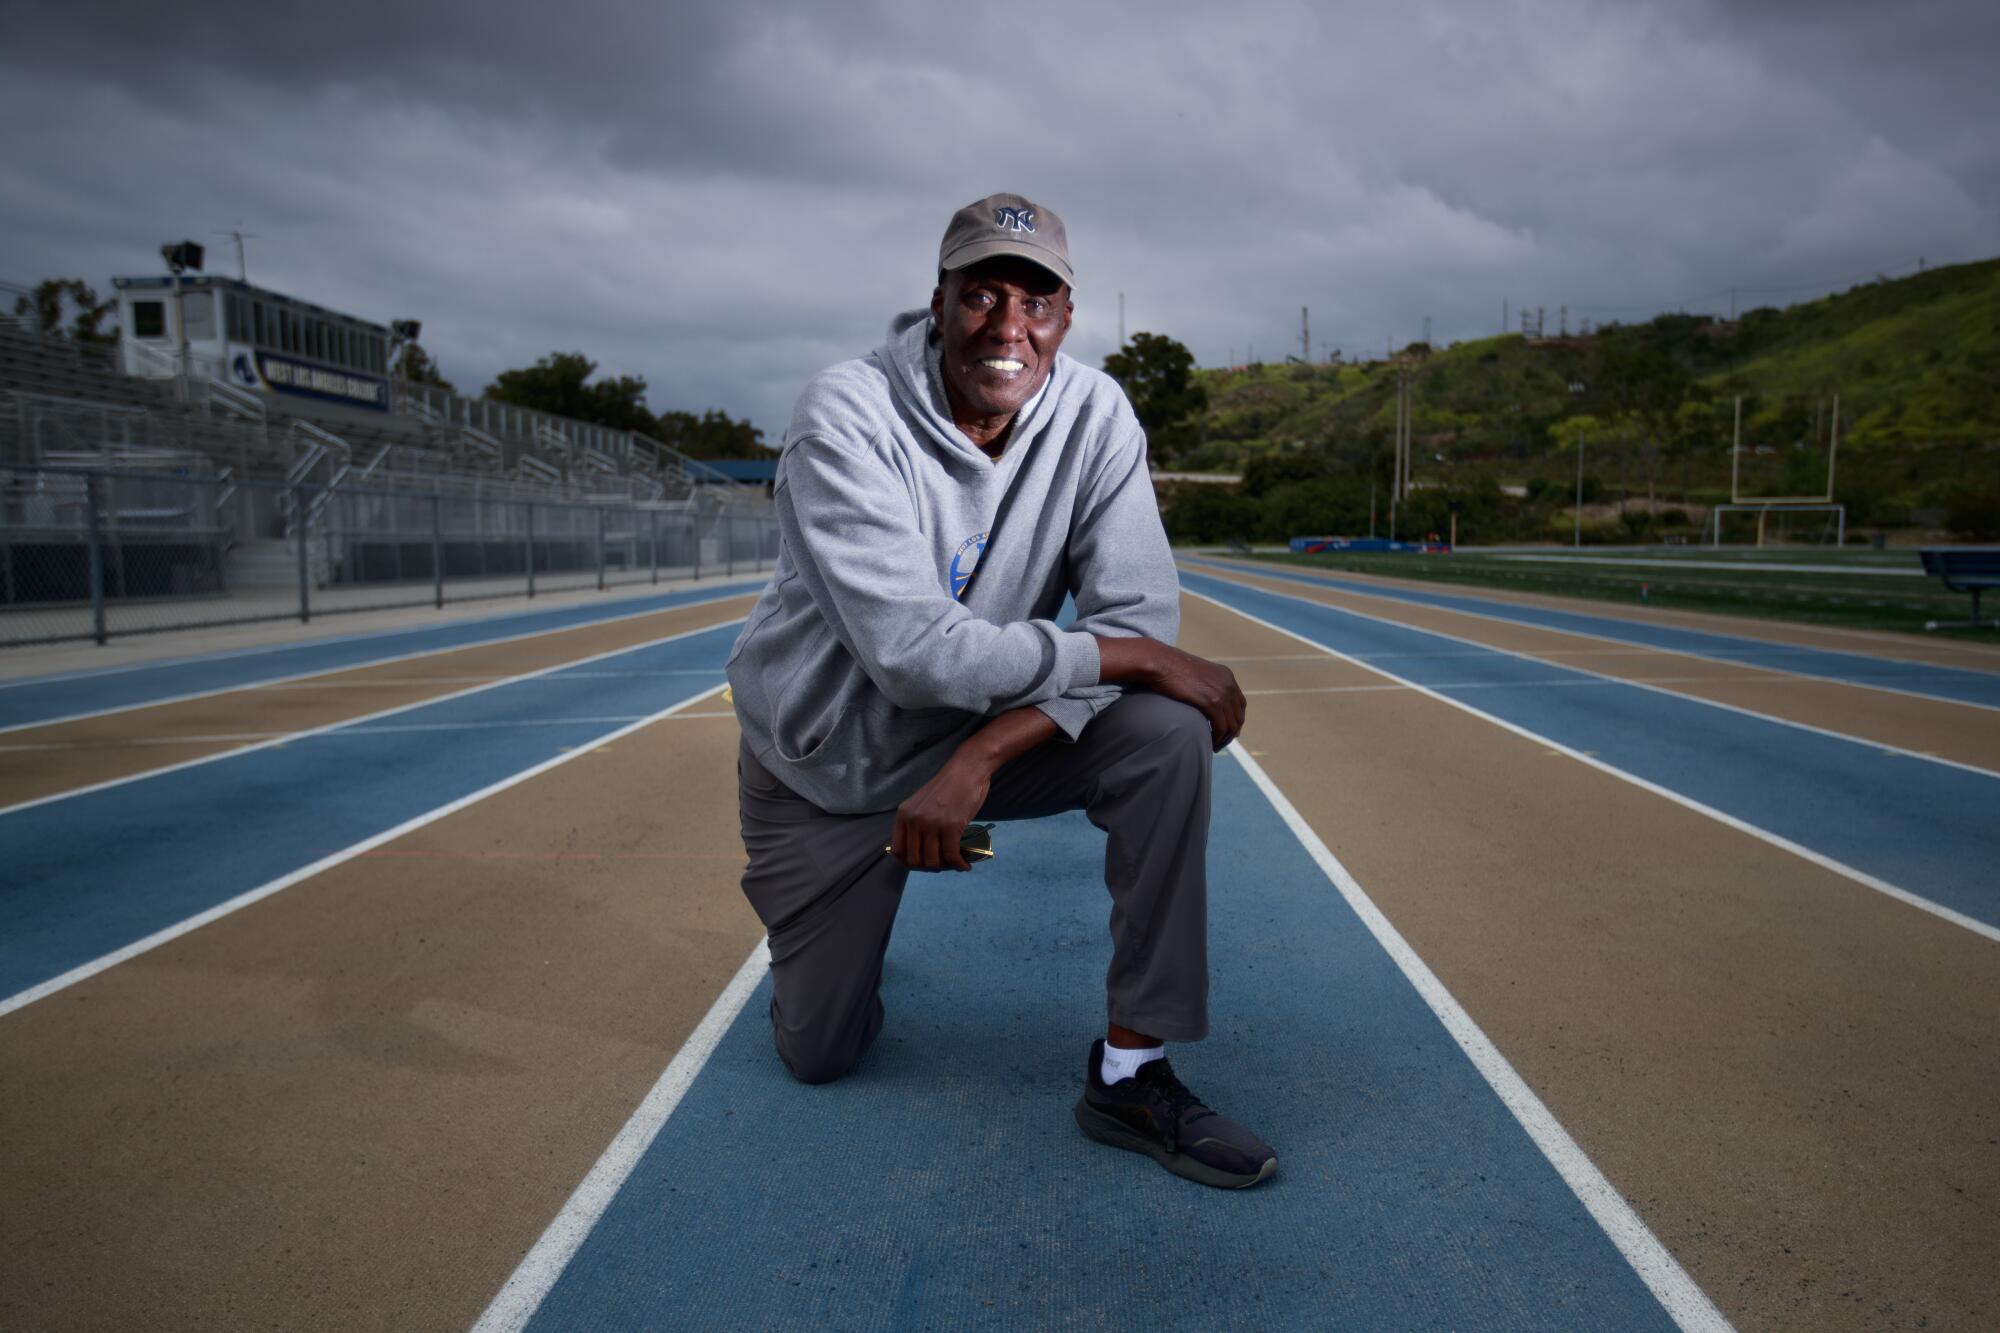 Track coach Bobby Kersee poses for a portrait in a stadium with blue lanes and a cloudy sky overhead.